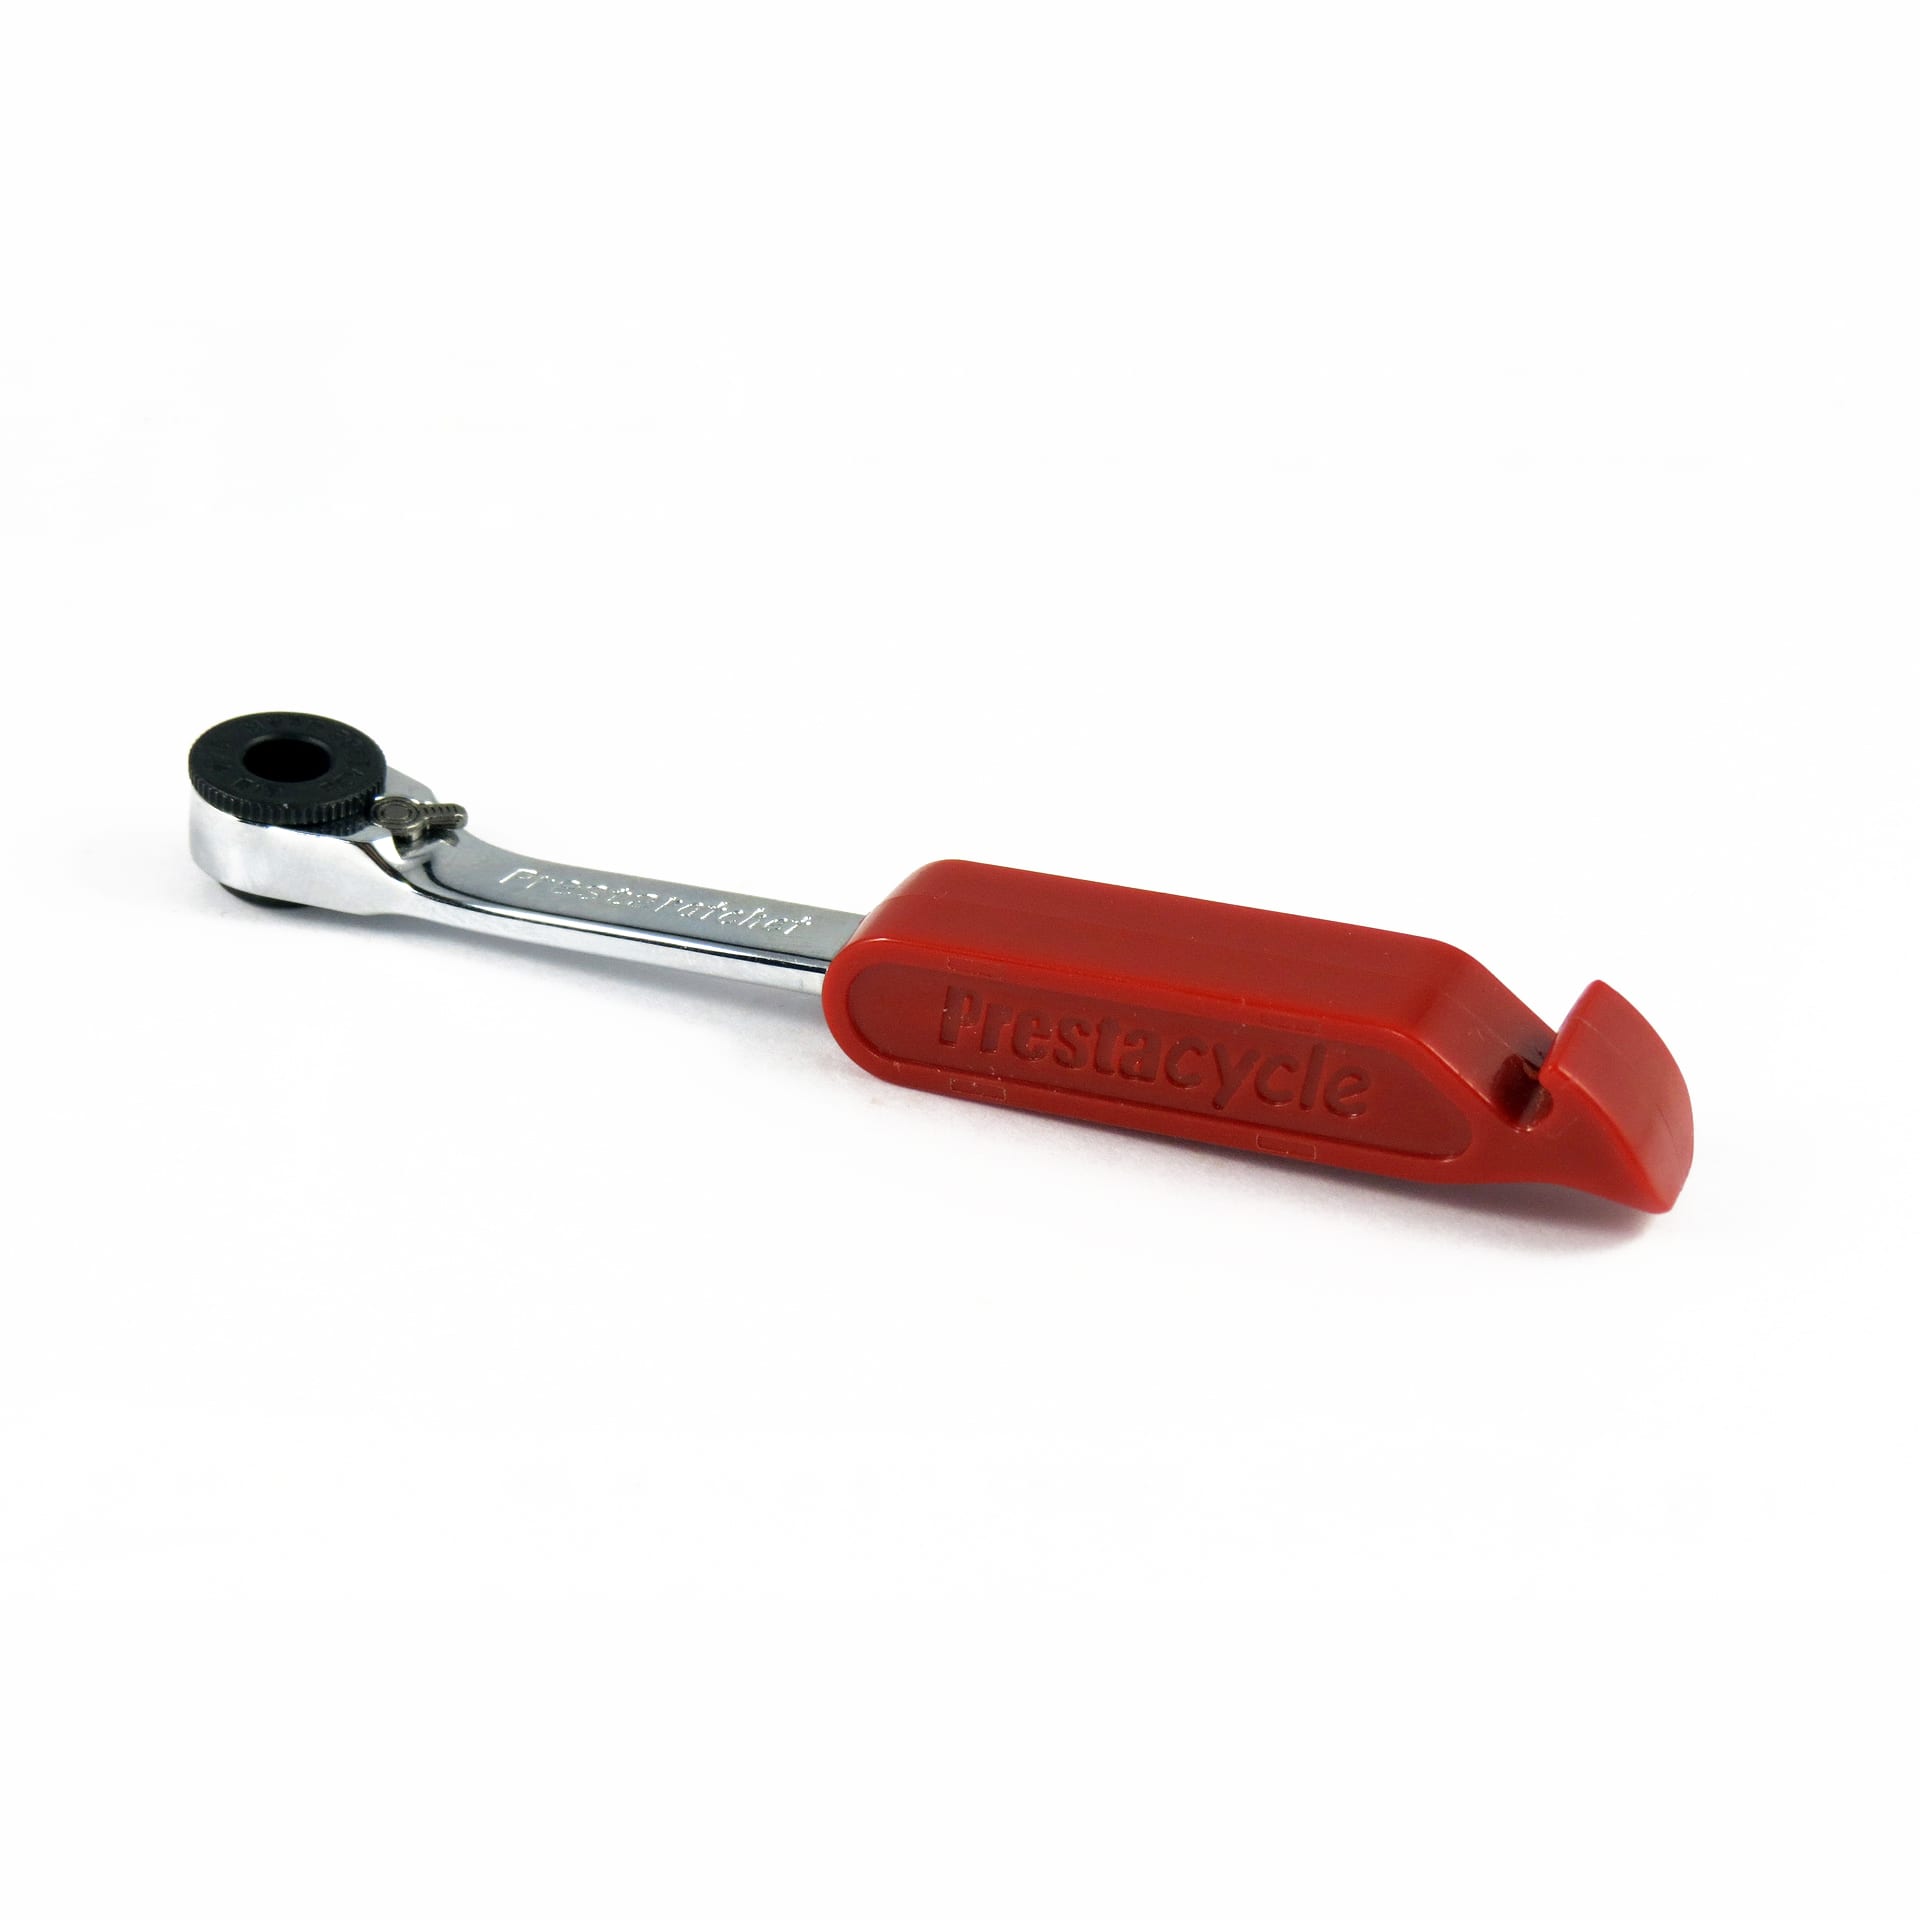 Prestaratchet tool with tire lever built into the handle (no bits)